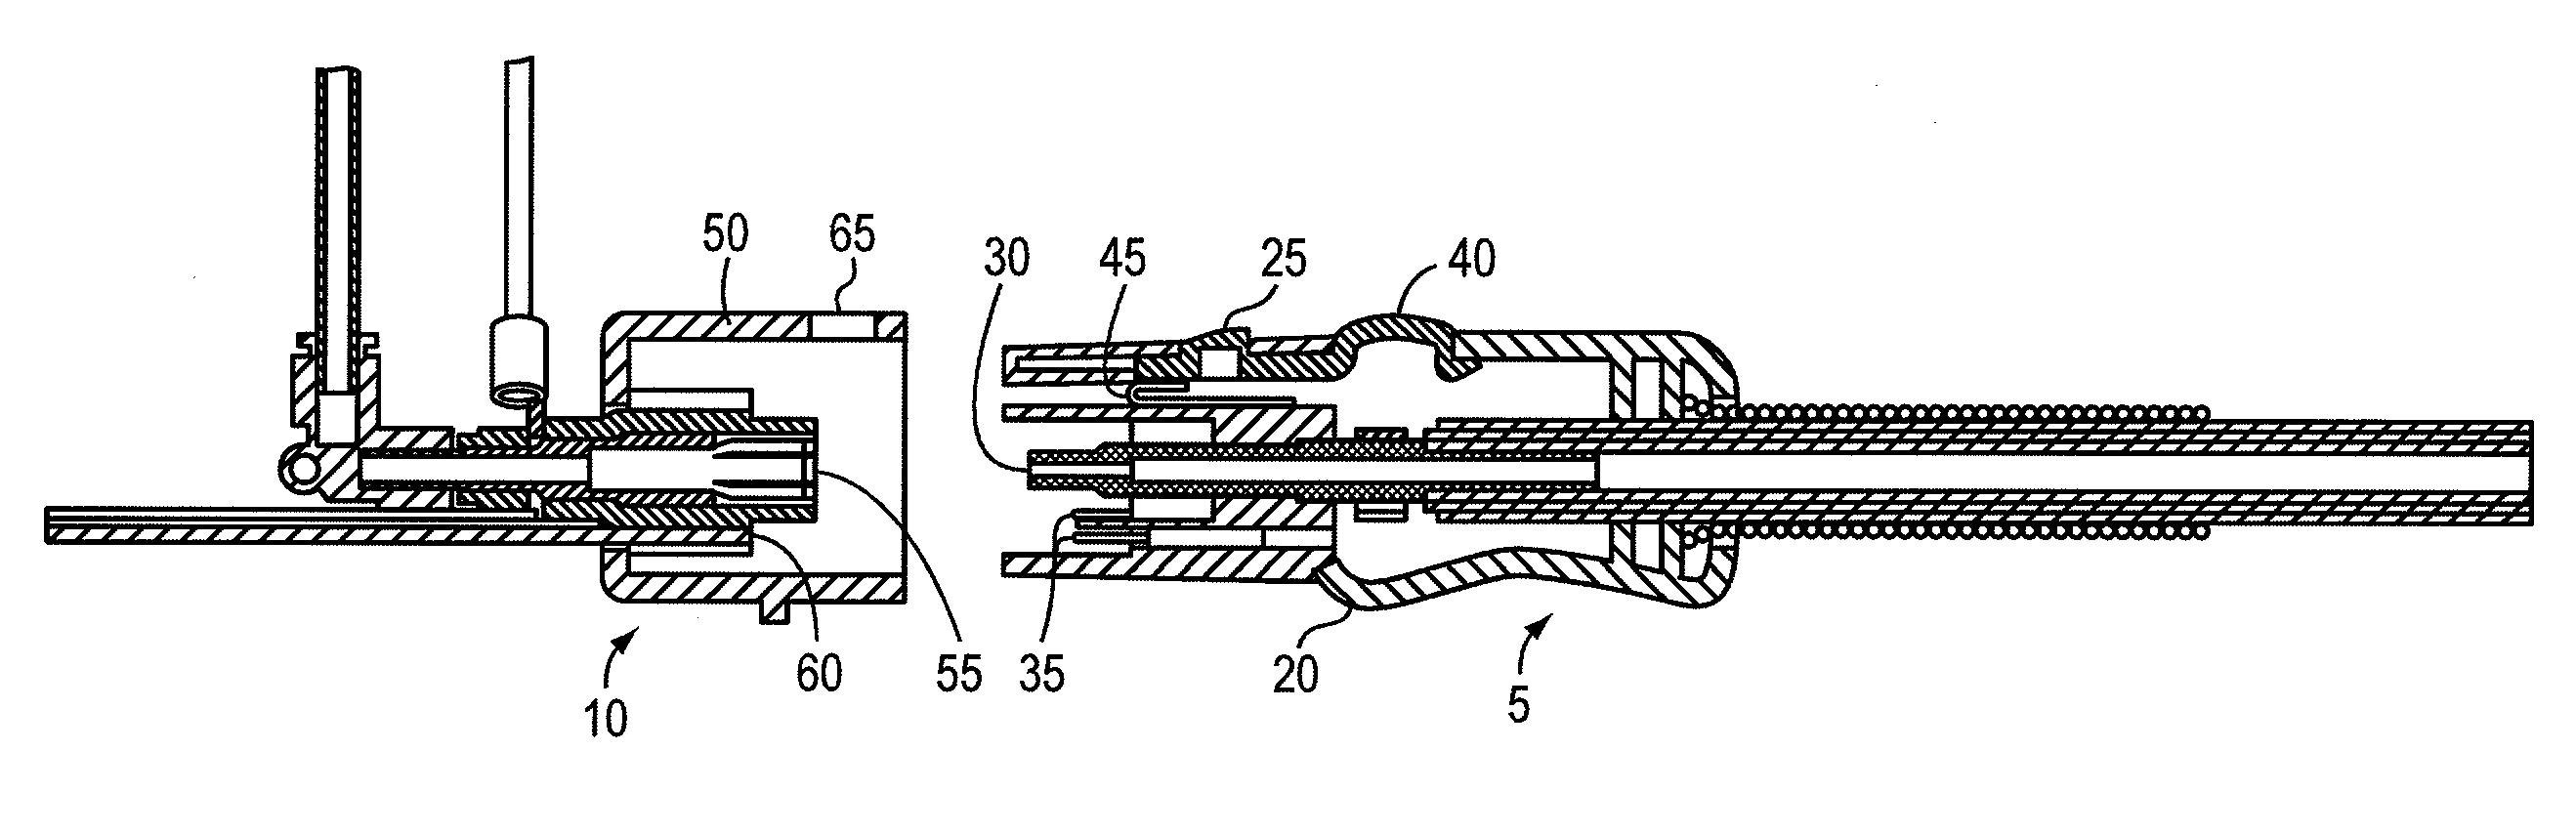 Connector for a thermal cutting system or welding system